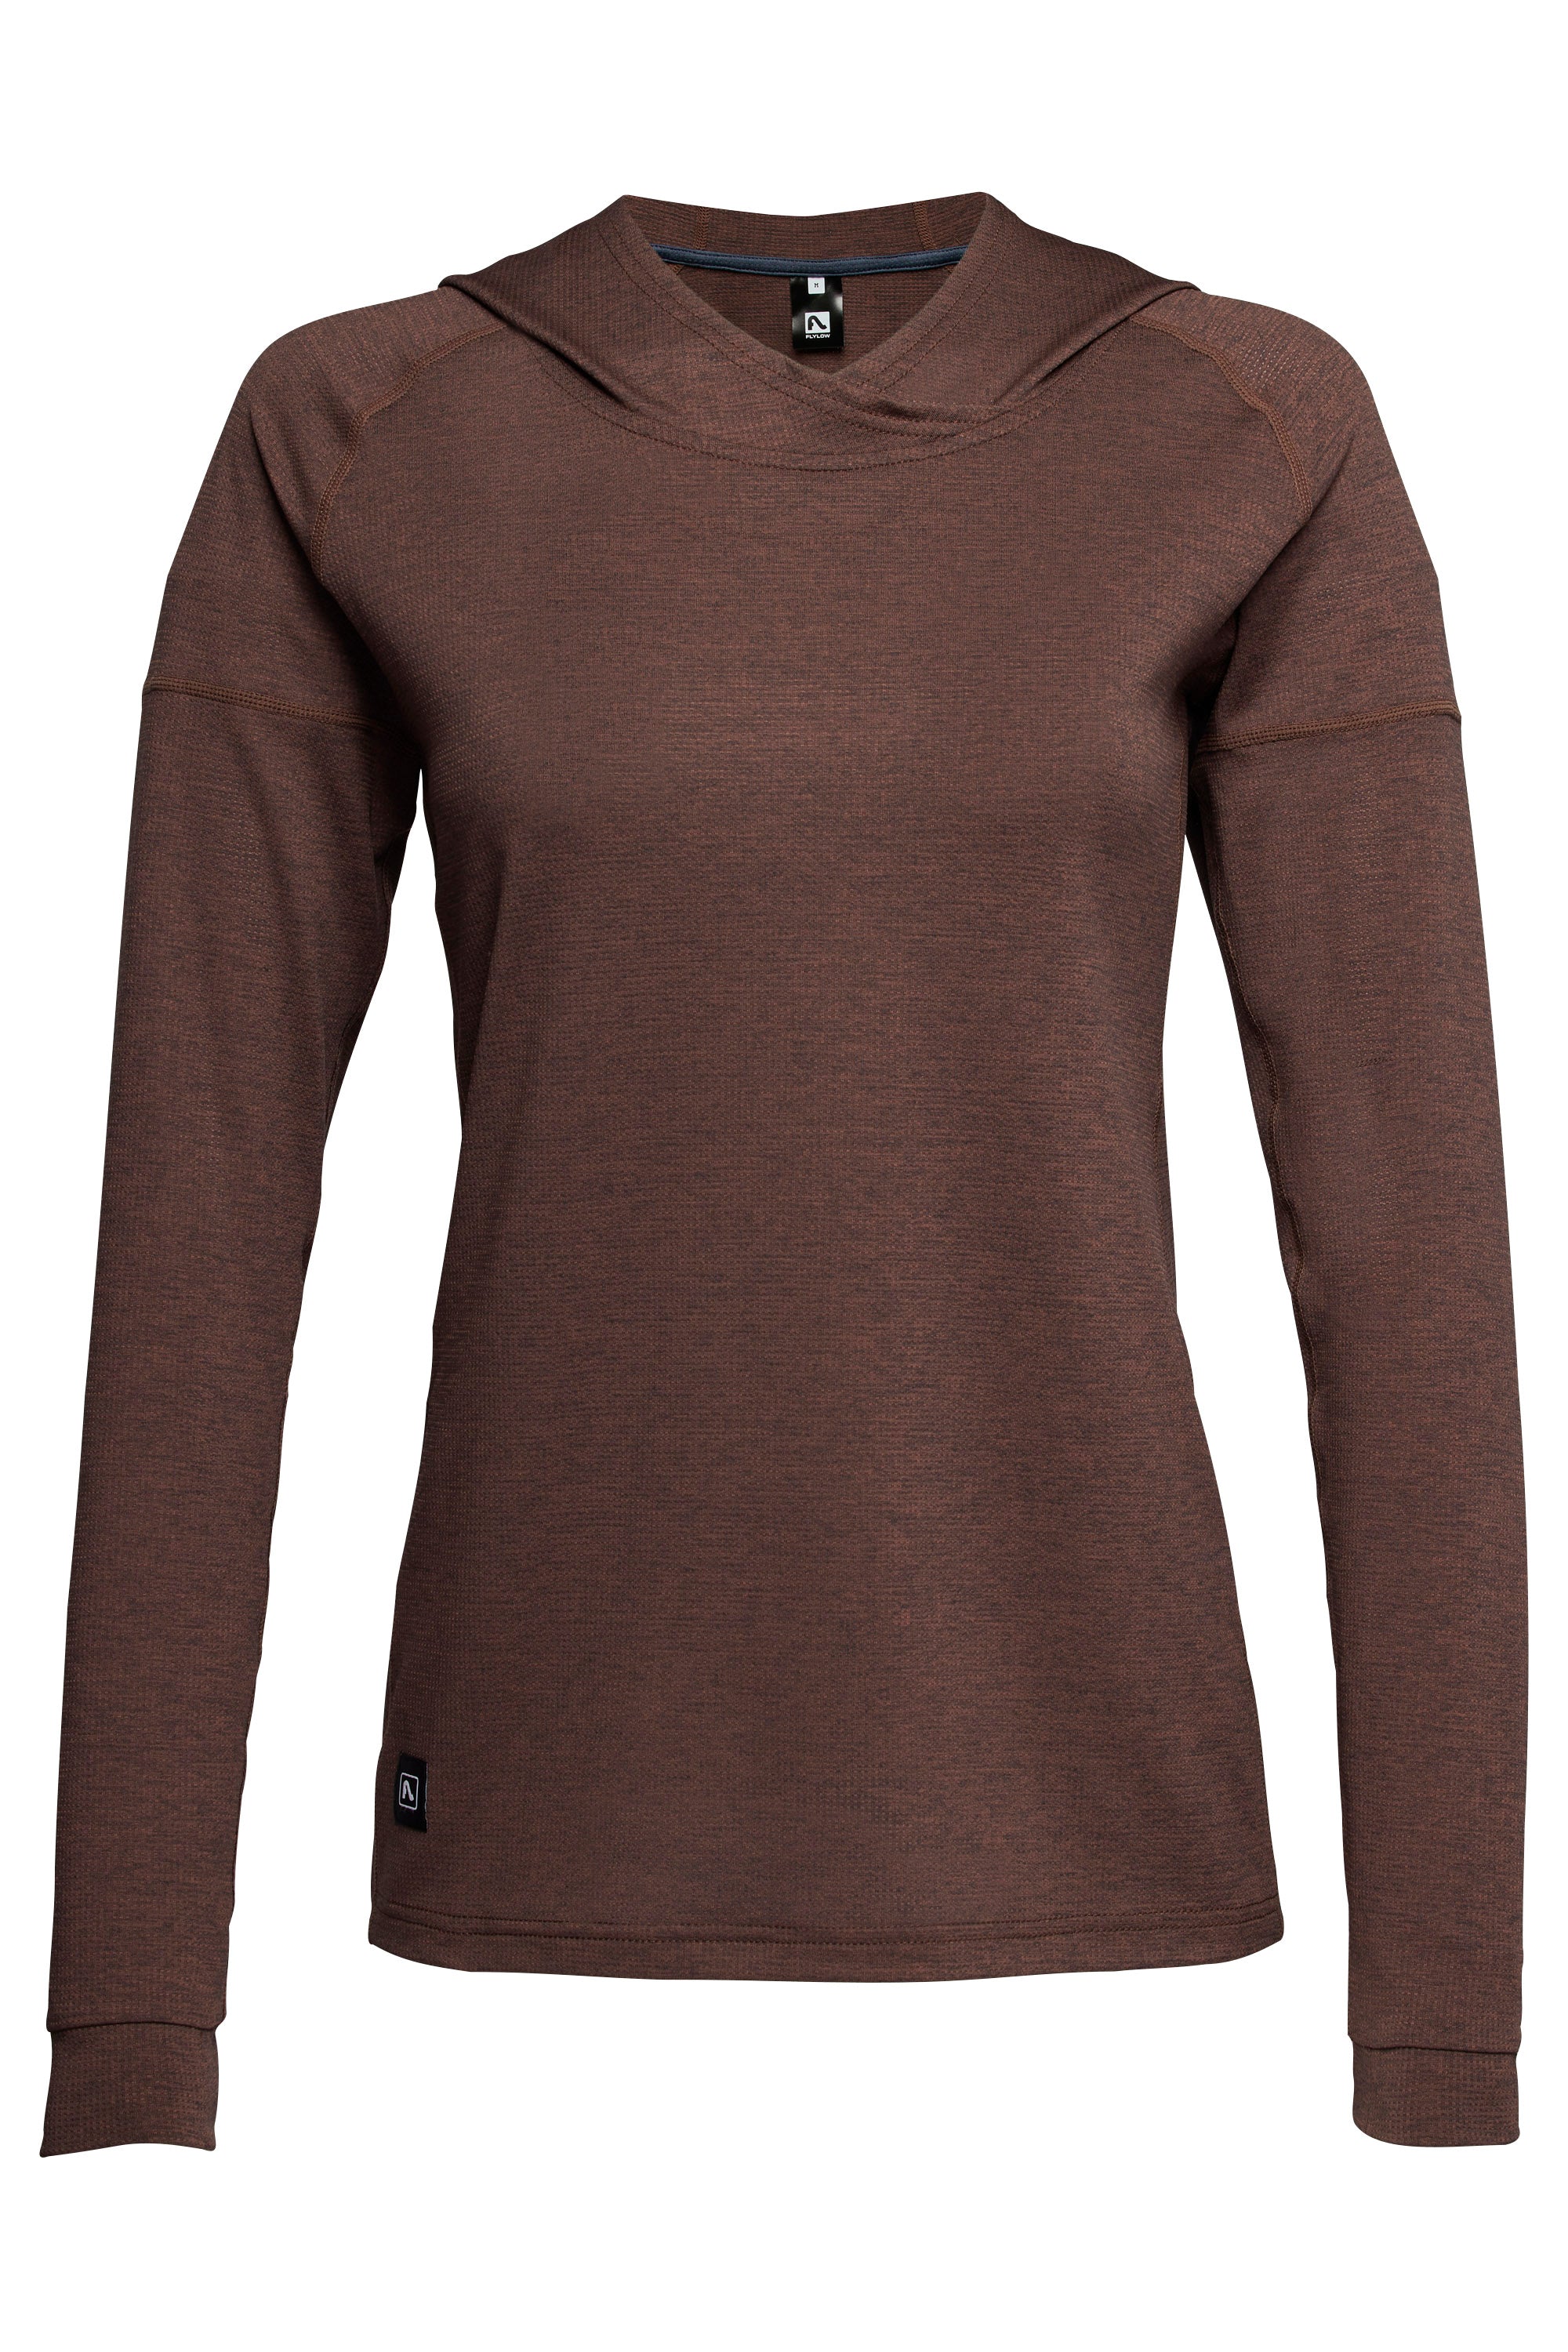 FlyLow Women's Moonlight Shirt | Tools For Trails